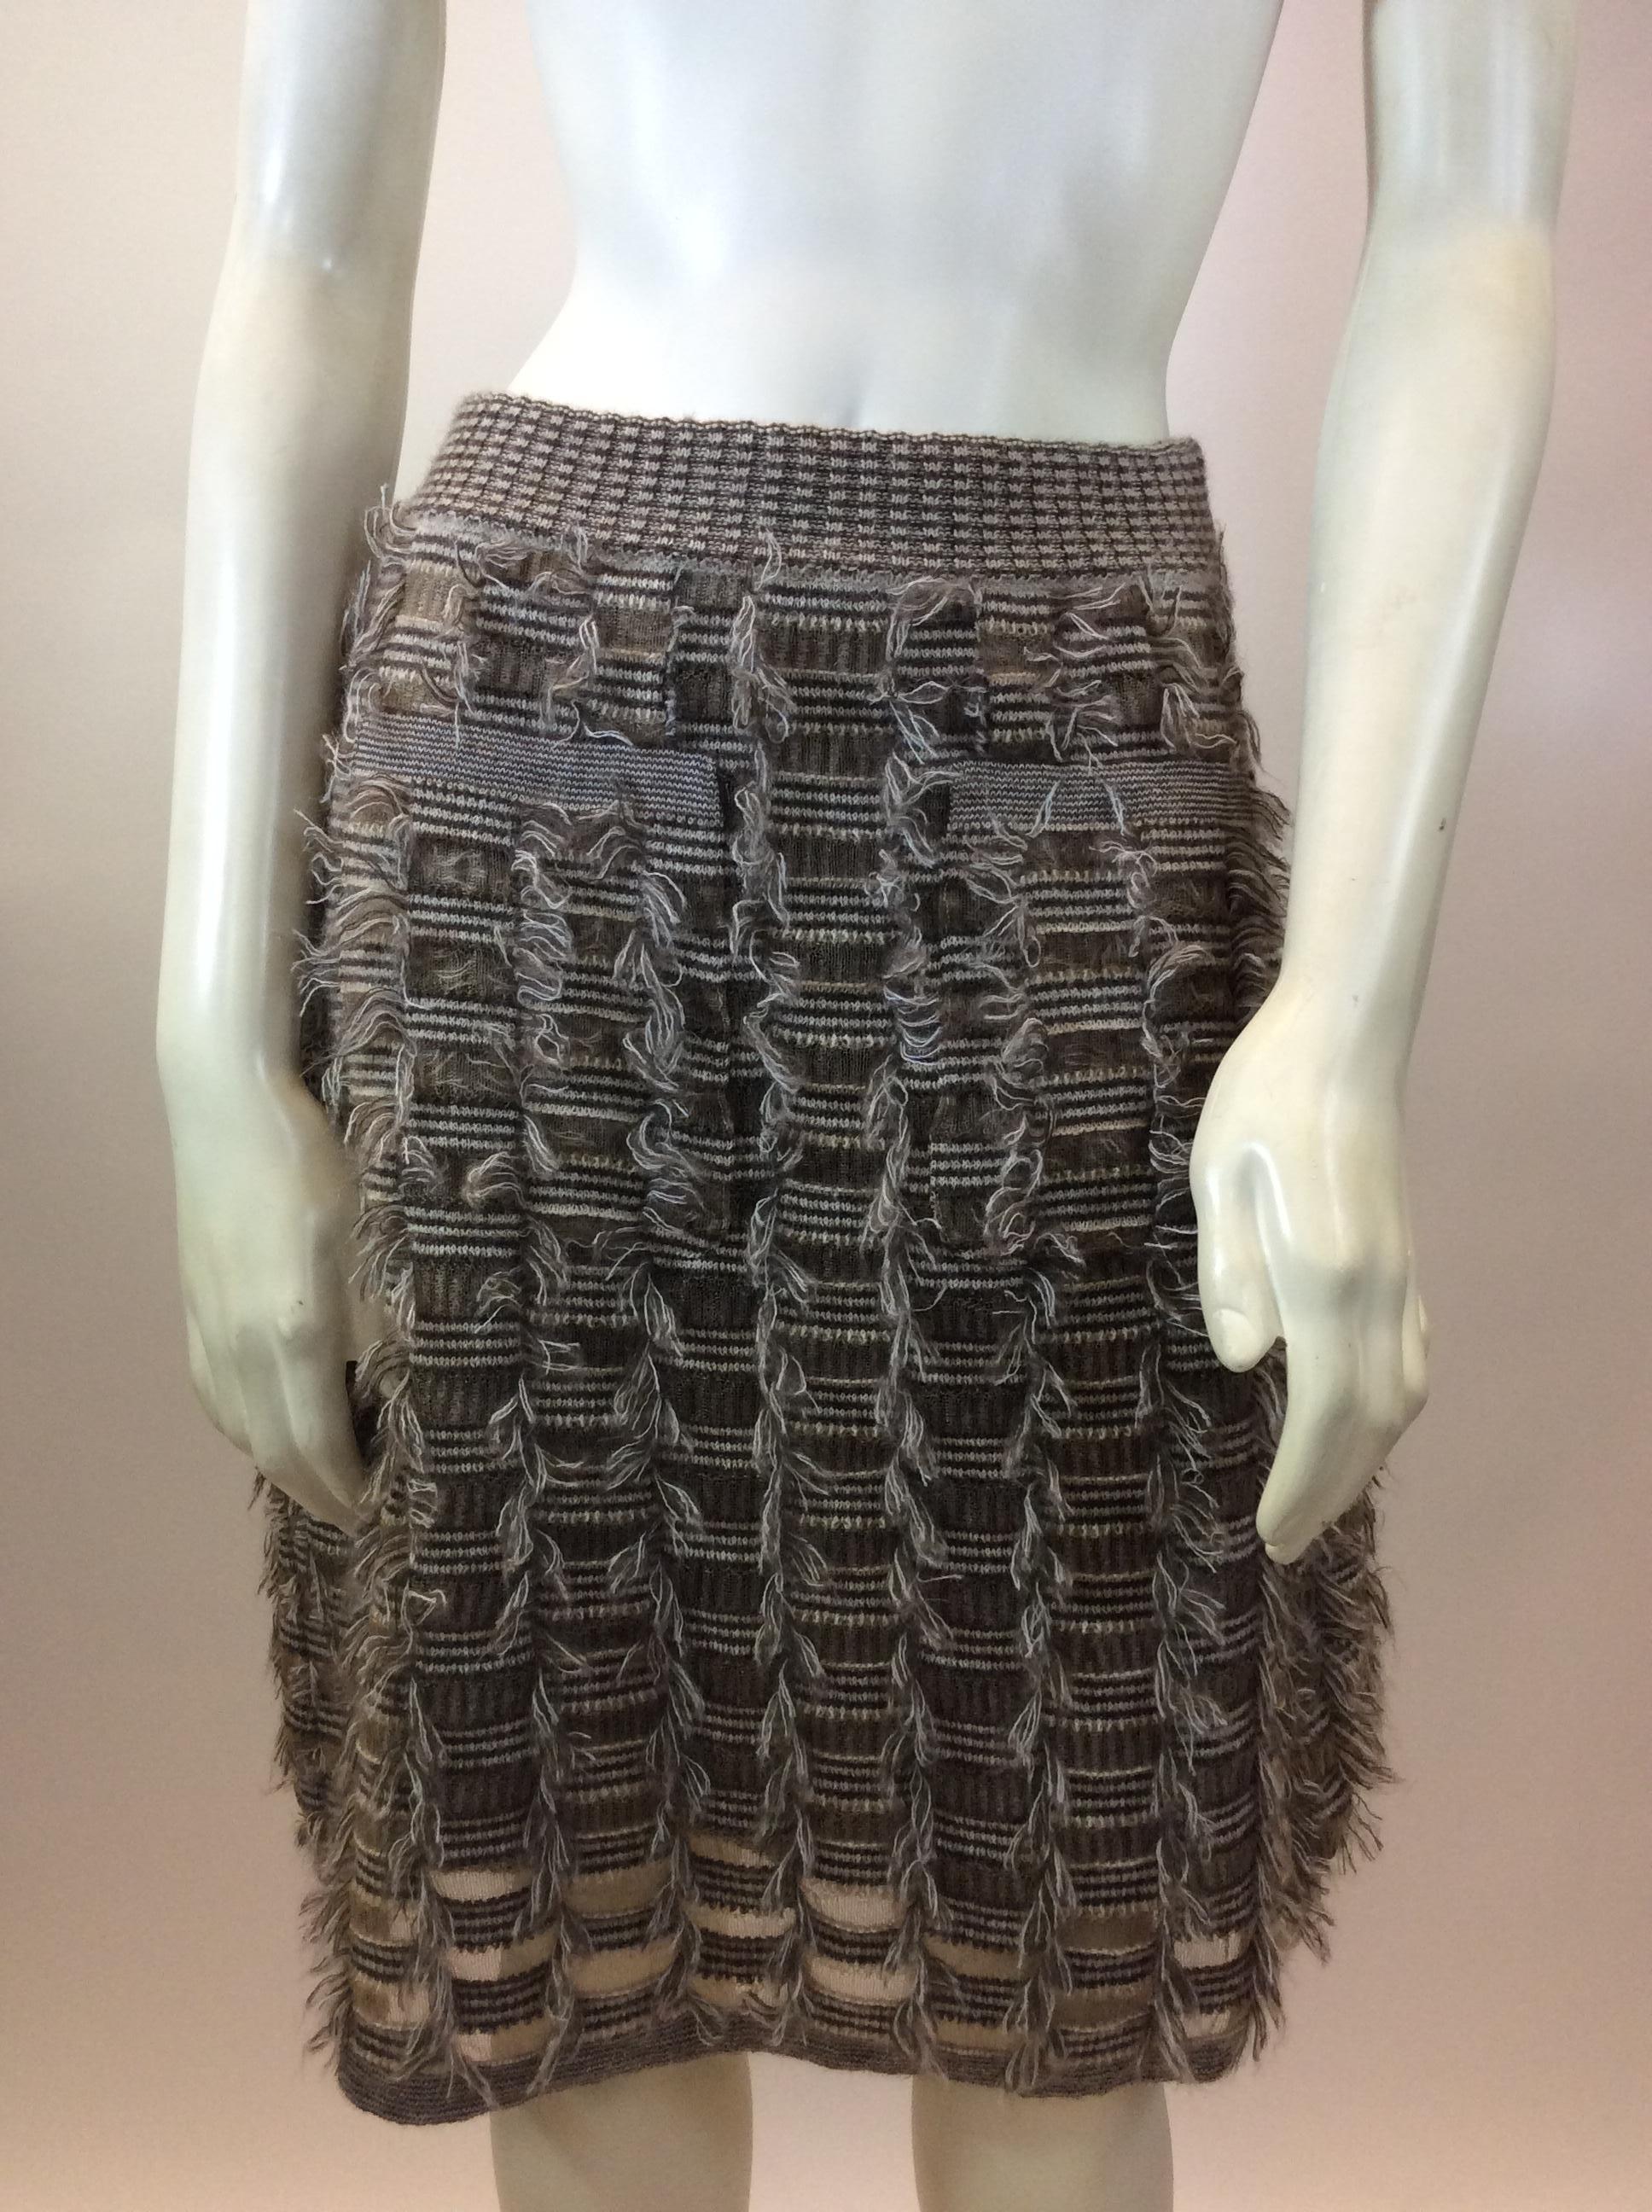 Chanel Tan Fringe Skirt NWT
$499
Made in Italy
54% mohair, 41% nylon, 5% wool
Size 34
Length 22